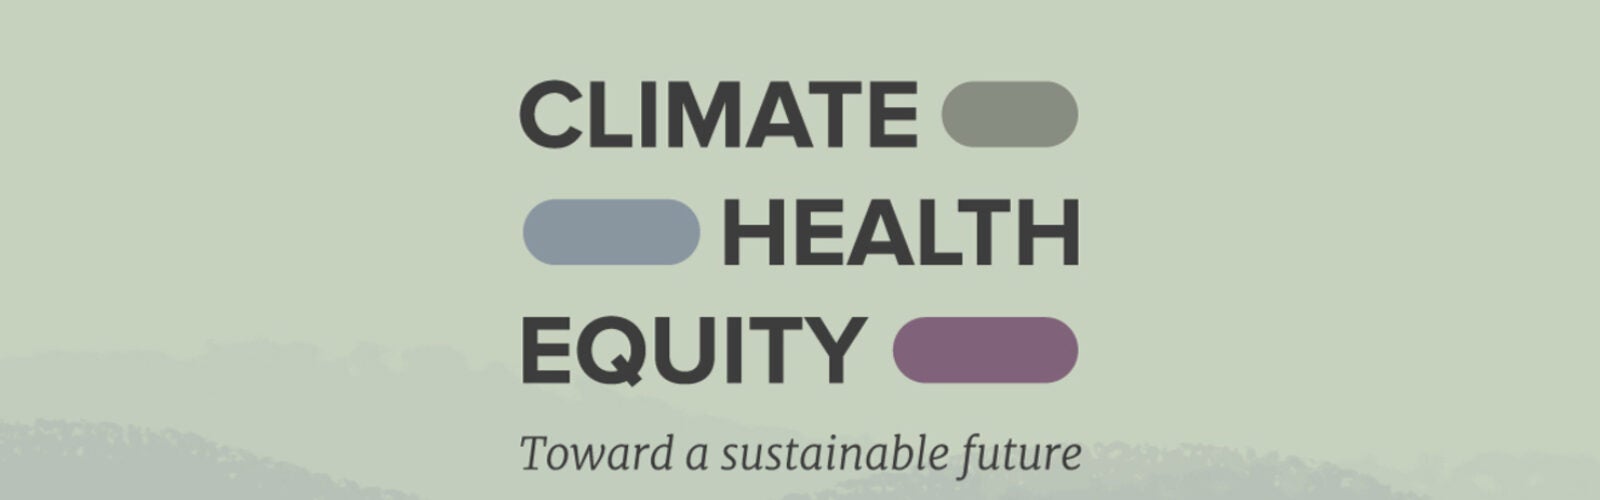 Climate, Health & Equity: Toward a Sustainable Future